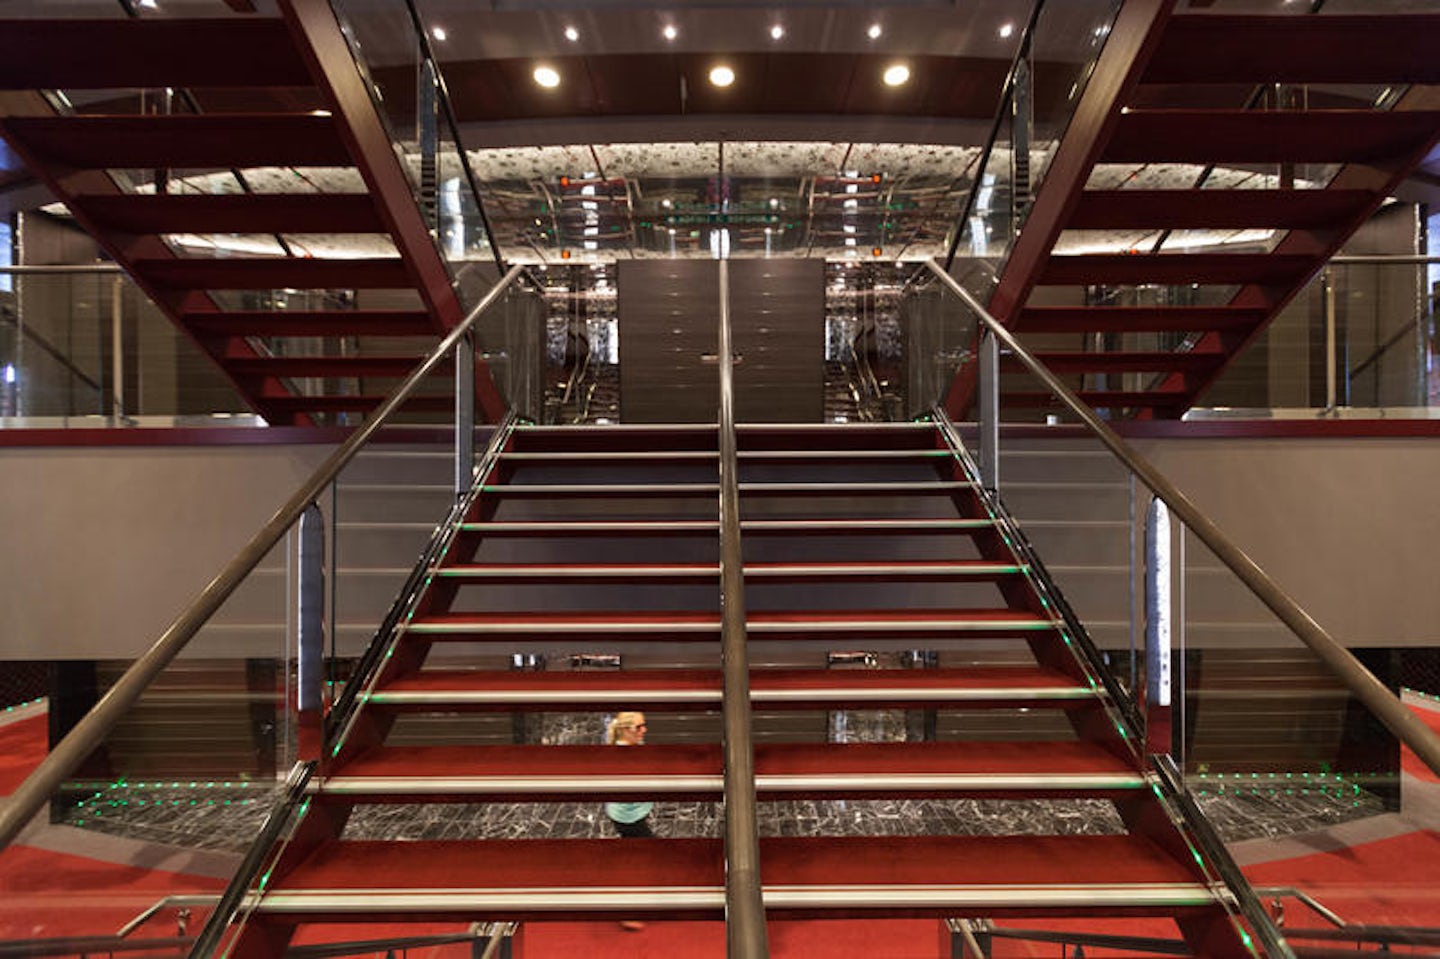 Stairs on MSC Divina